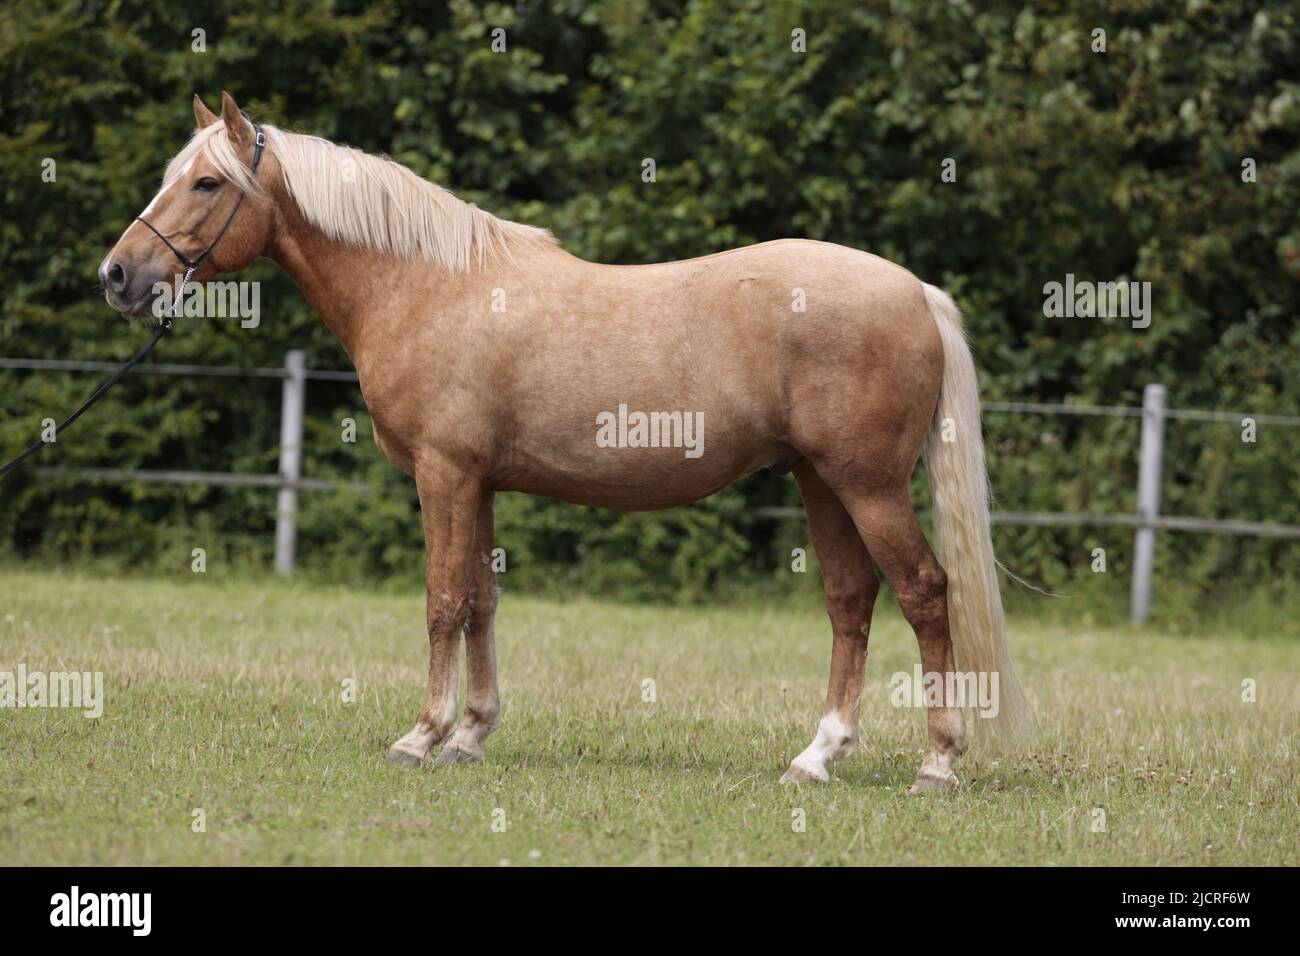 Azteca Horse. Adult palomino standing, seen side-on. Germany Stock Photo